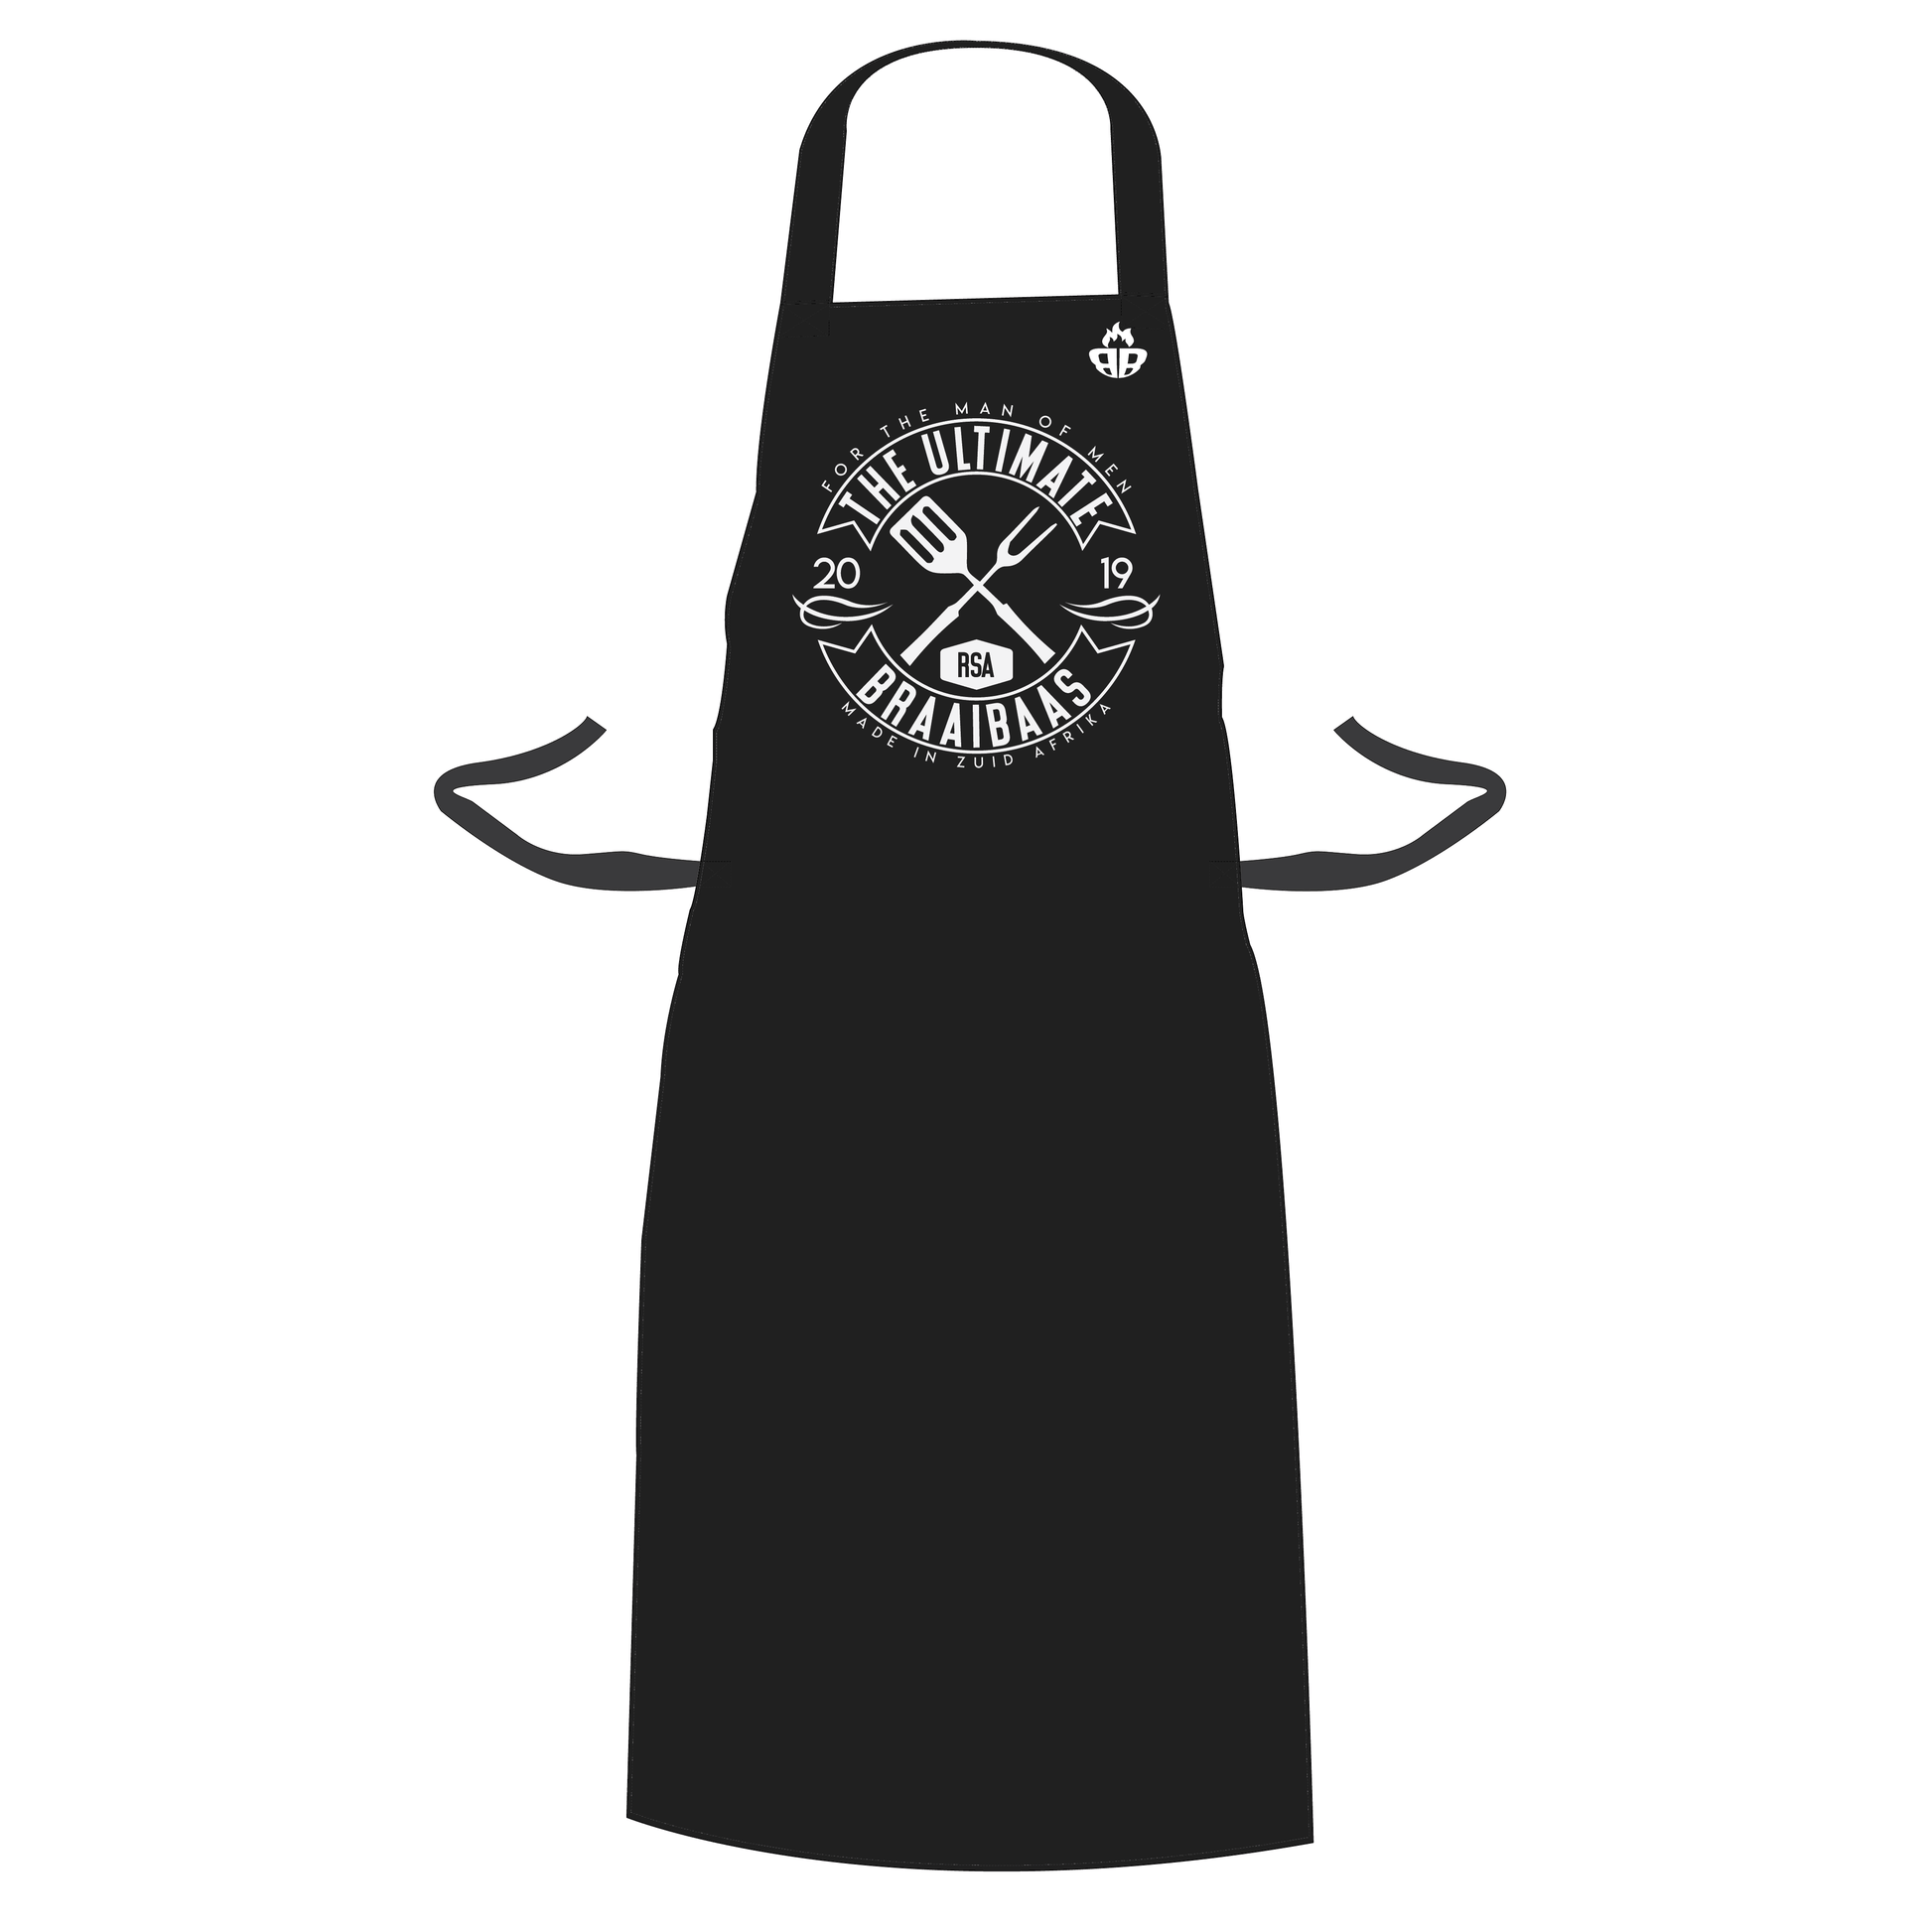 aprons for the best and ultimate braai, cooking and barbecuing person